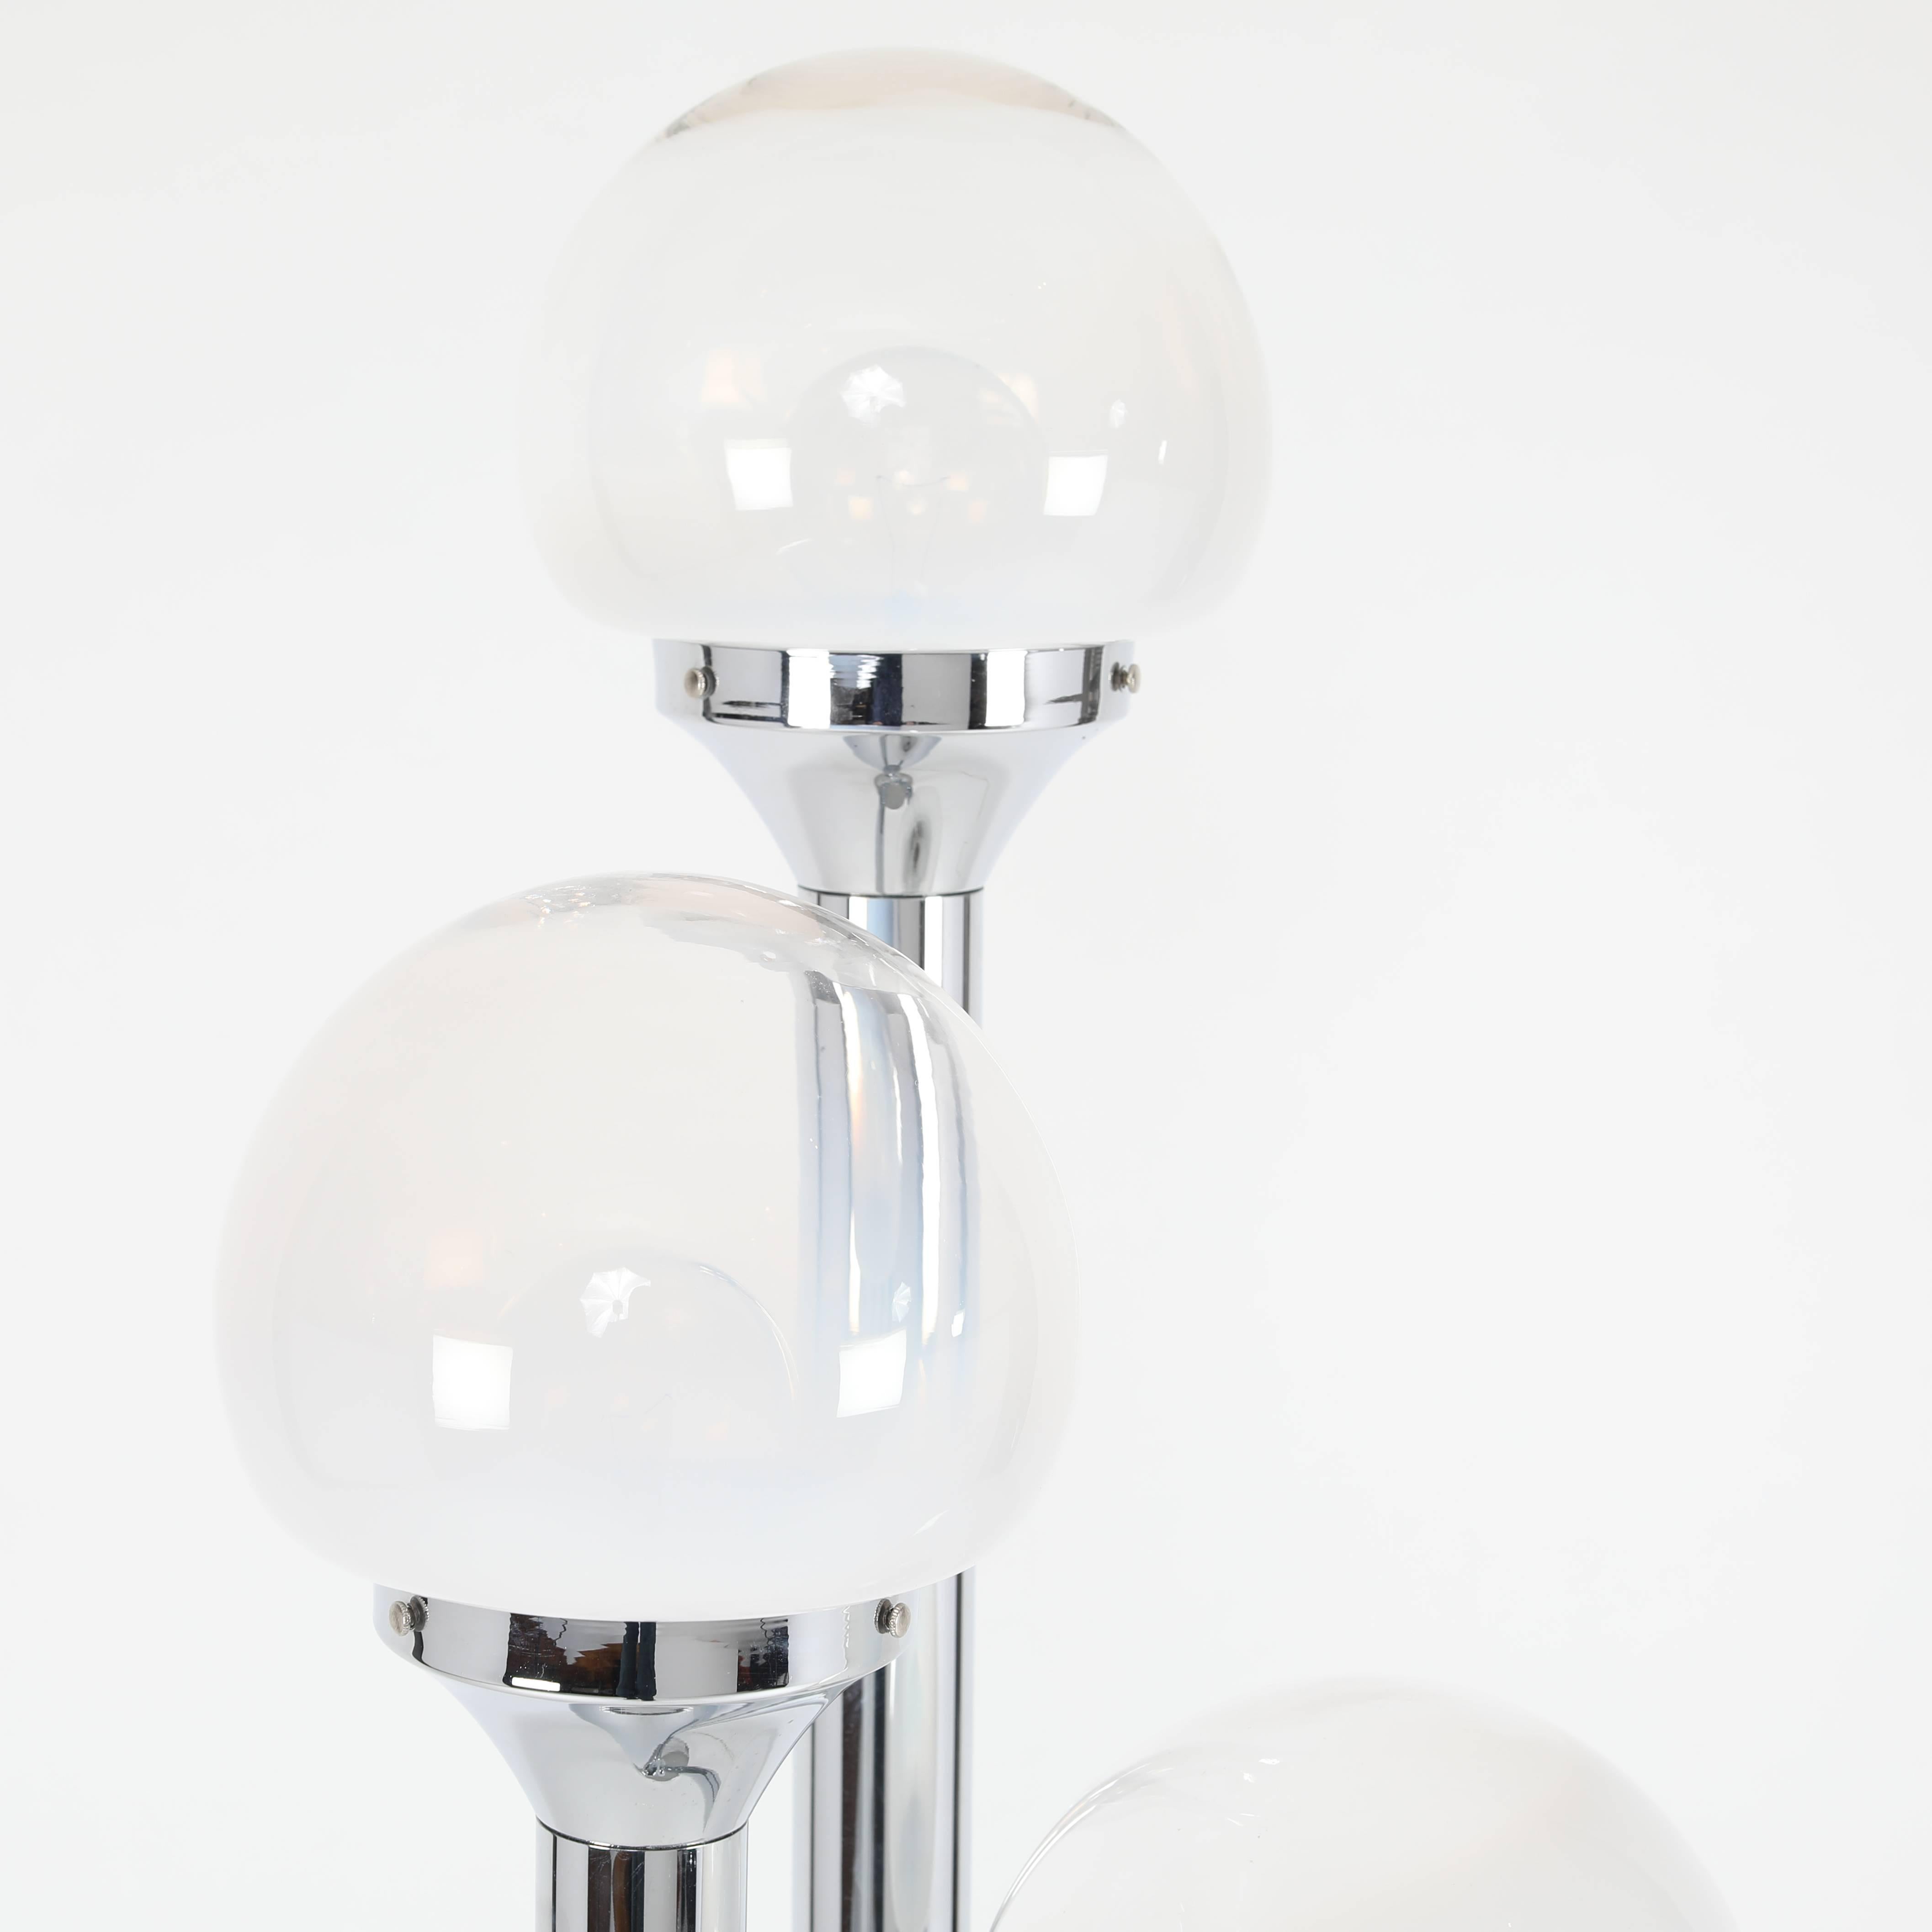 Polished-chrome floor lamp with three tubular supports, each holding a Murano-glass globe that is solid white at the base graduating to clear at the top. A foot switch is located in the middle of the round base. Uses three standard-base bulbs.